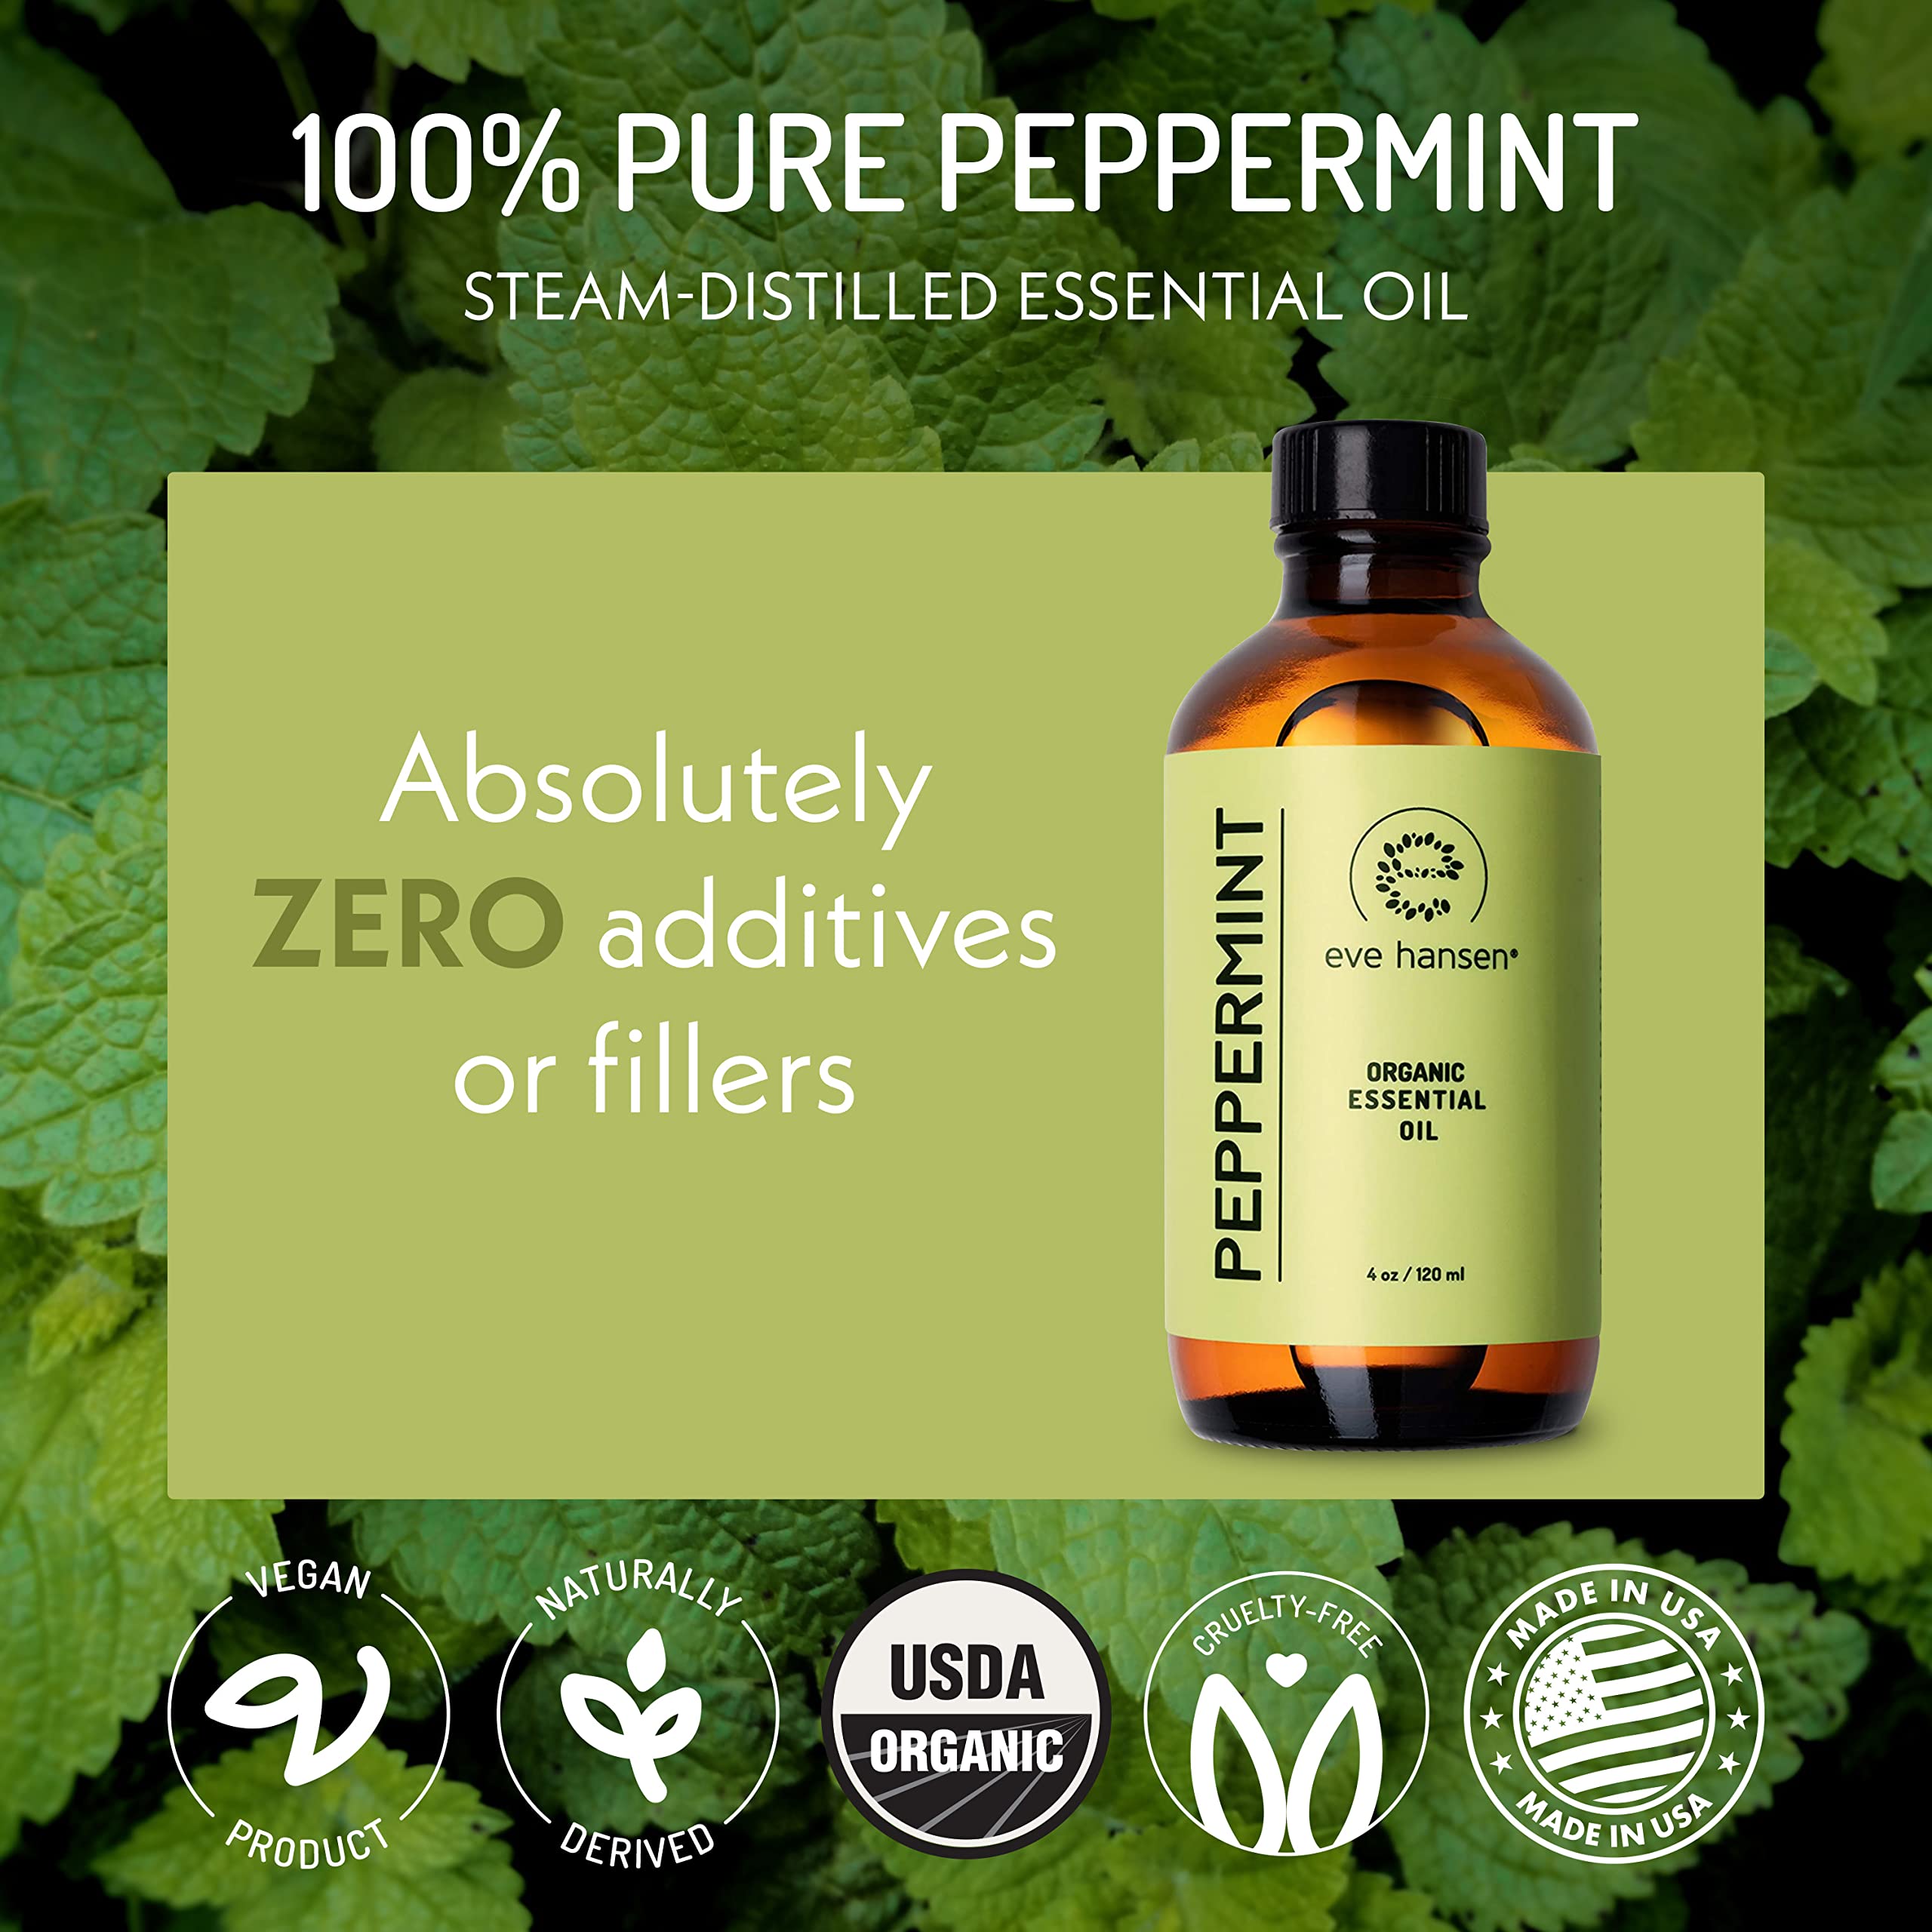 Eve Hansen USDA Certified Organic Peppermint Essential Oil | Huge 4 oz Mentha PIPERITA Essential Oil for Aromatherapy | Aromatherapy Oil for Diffuser and Pure Essential Oil for Home Use